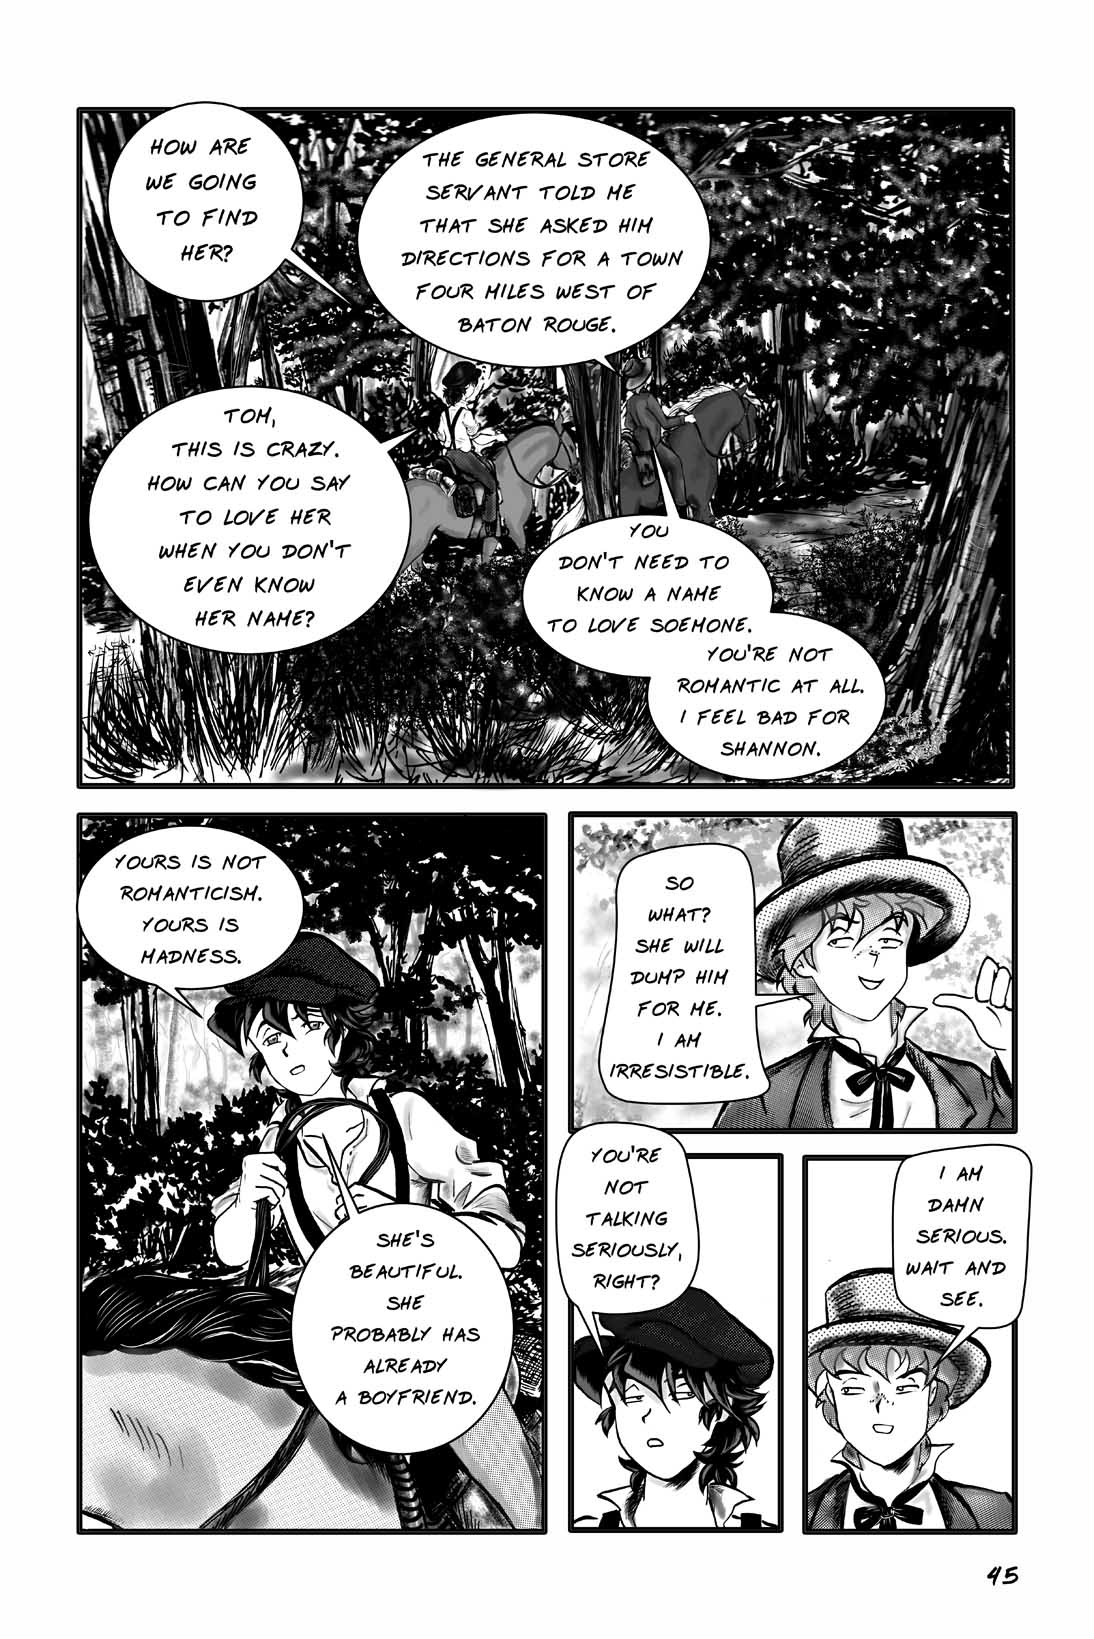 page45-Legends of the West